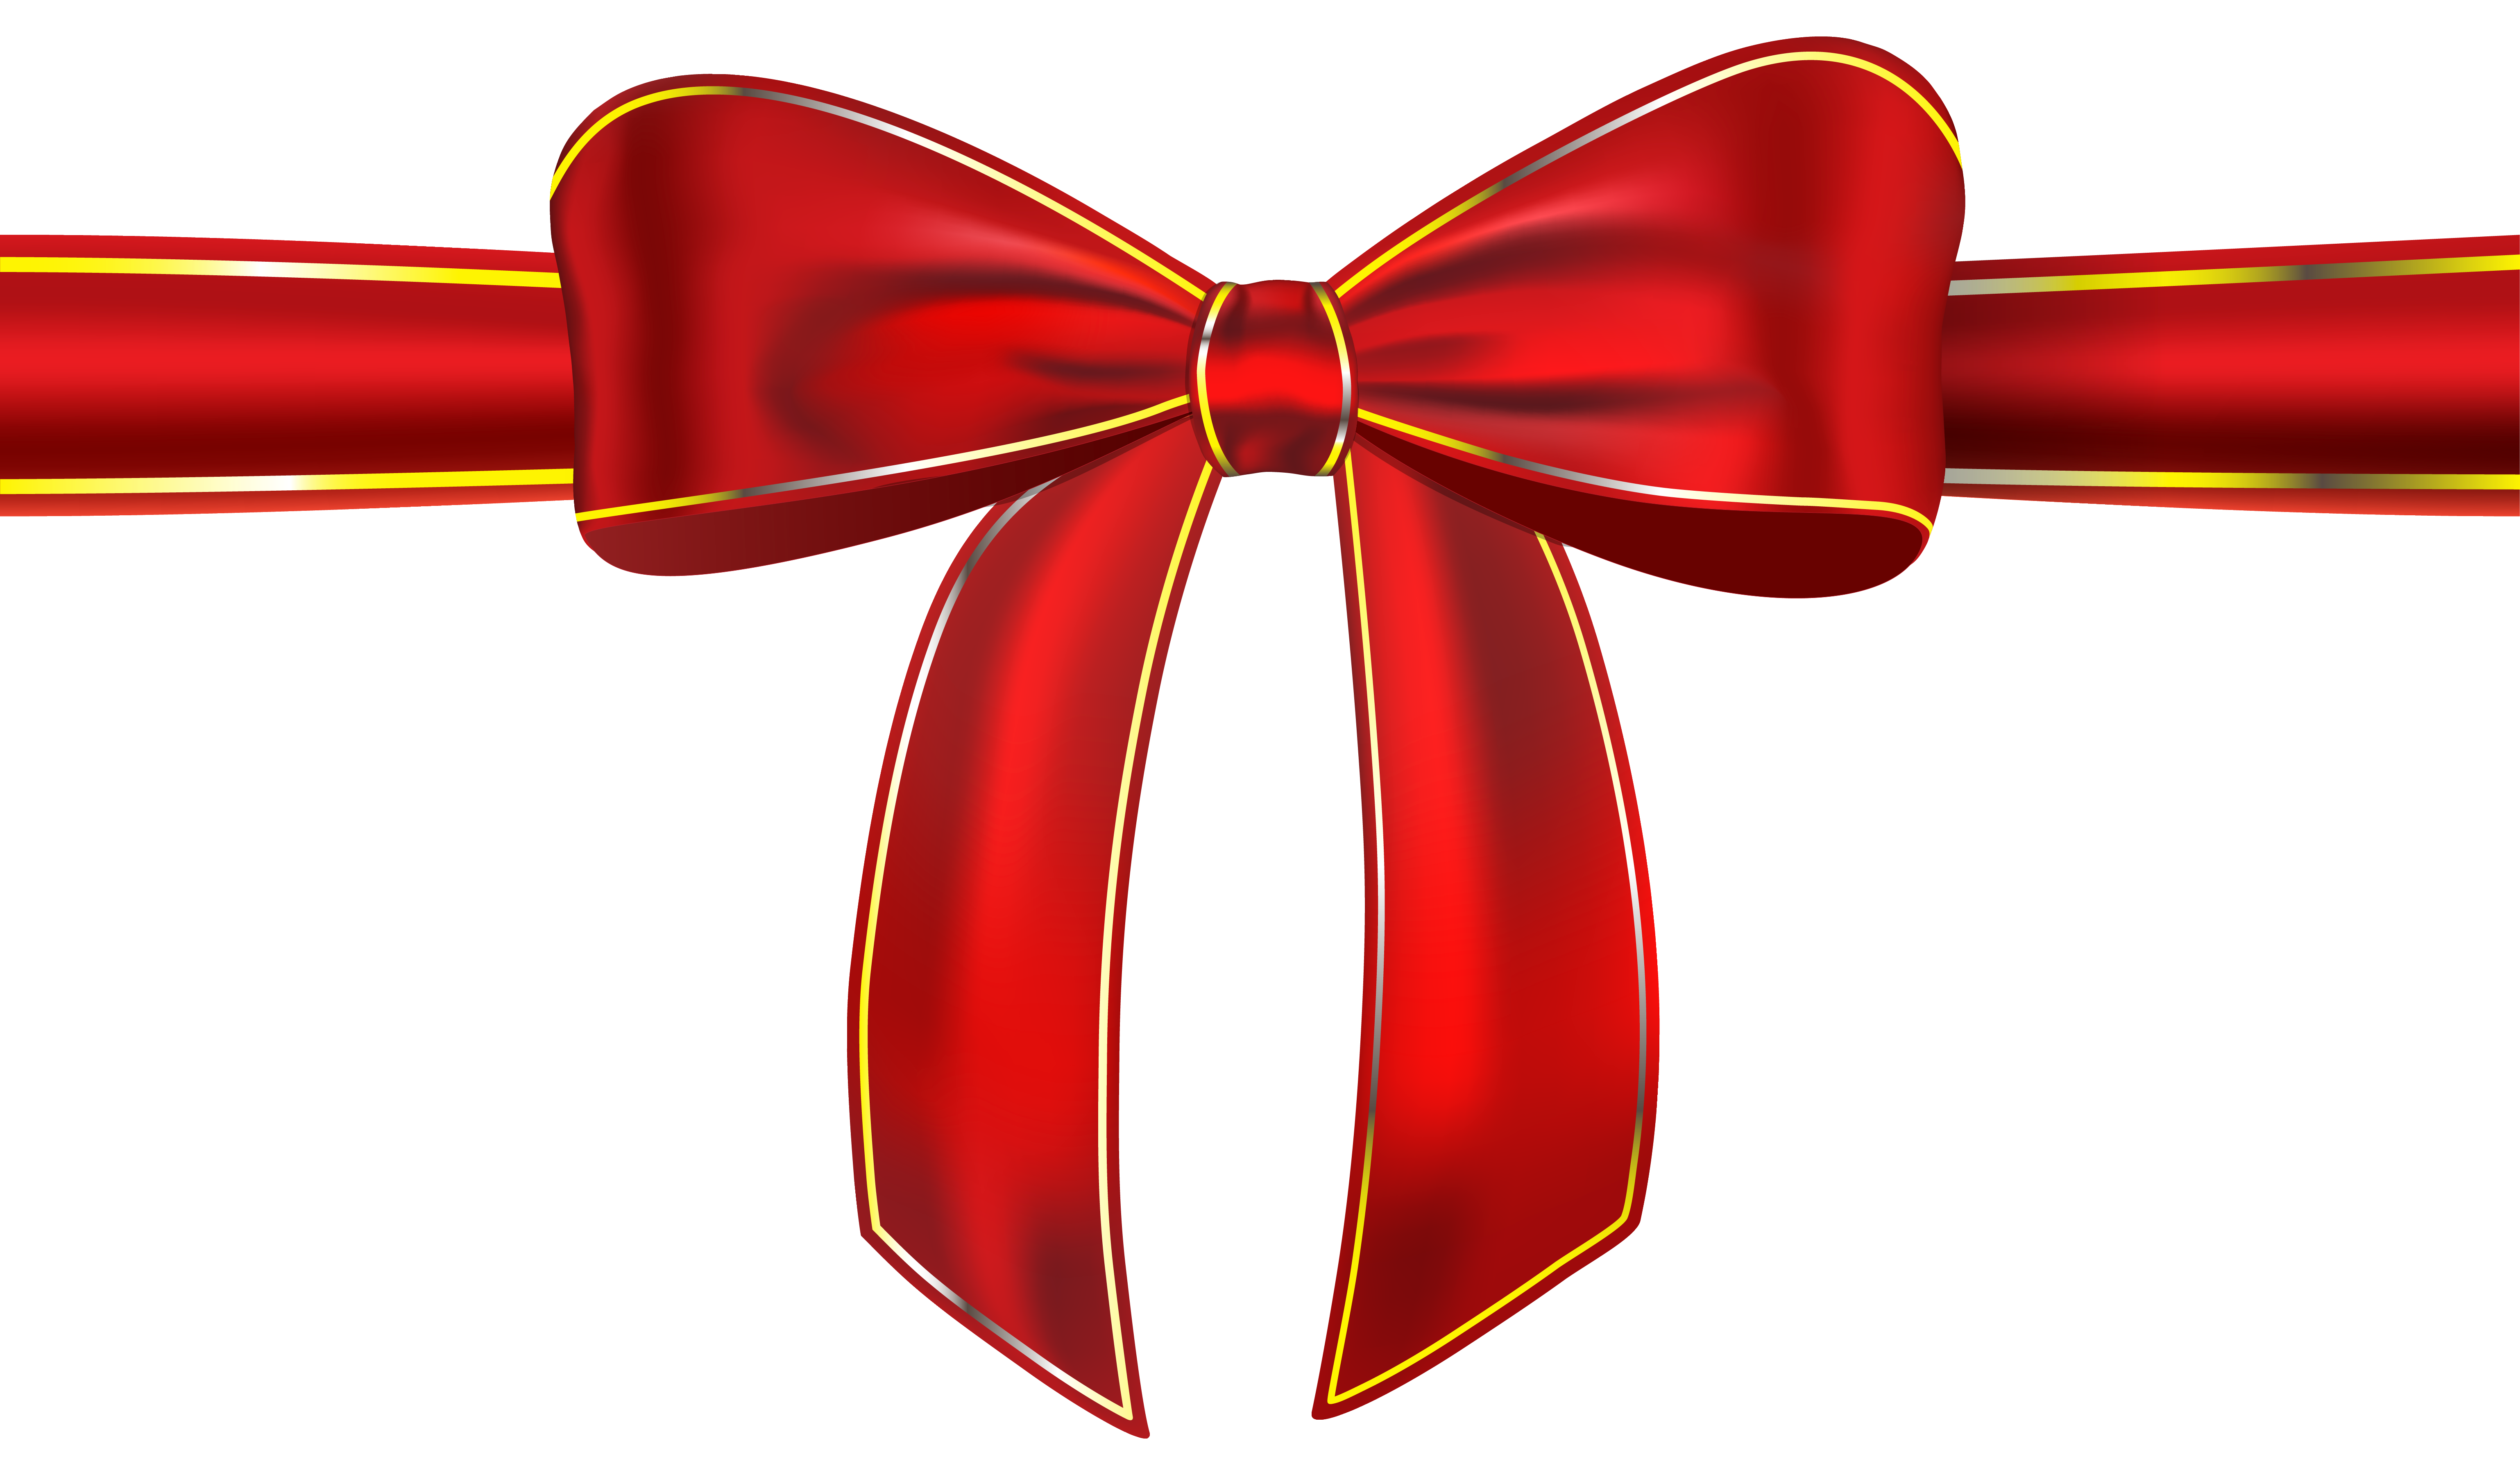 Red Ribbon Clip Art Red Ribbon With Bow Png Clipart Picture Png Download Free